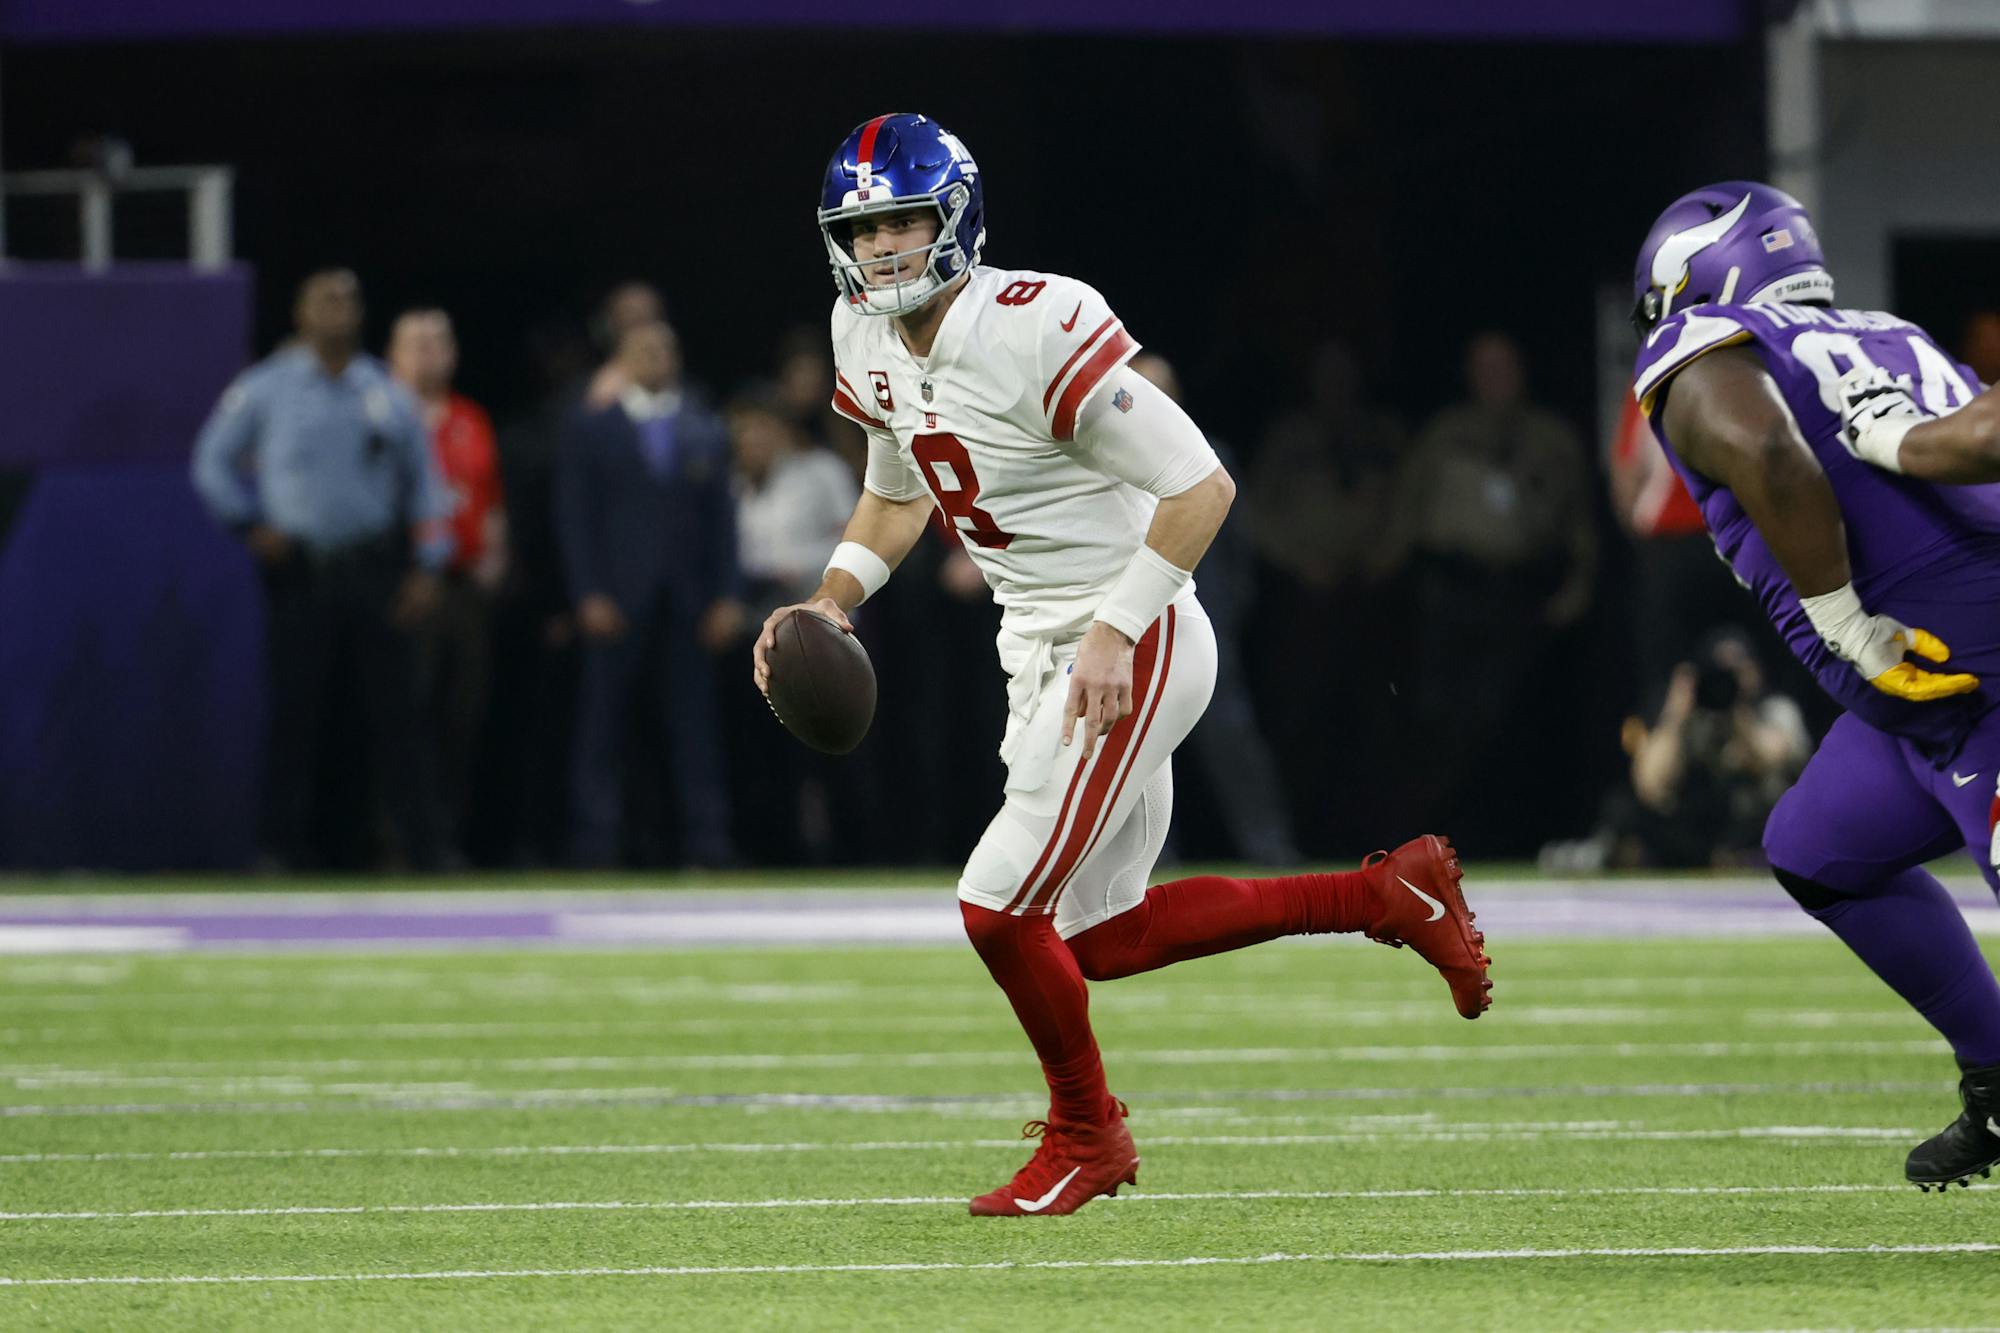 Seahawks vs. Giants Player Prop Bets for Monday Night Football: Geno Smith,  DK Metcalf, Daniel Jones, and Others